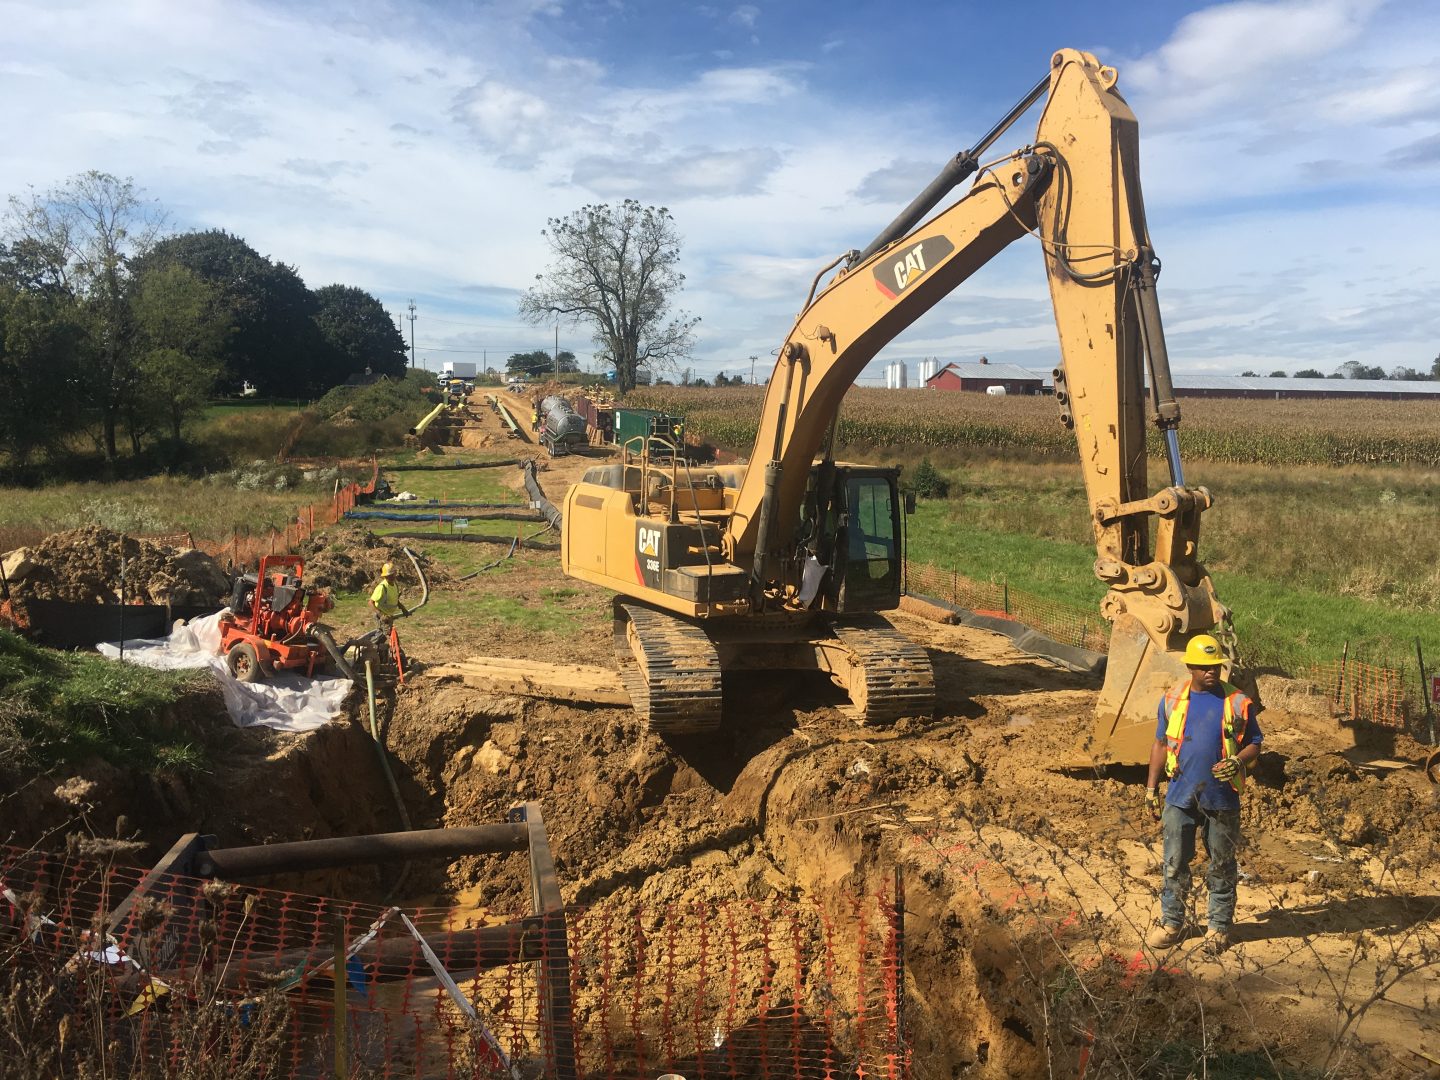 A Mariner East 2 construction site in rural Pennsylvania. The Public Utility Commission lifted a ban  on construction of a valve, removing one obstacle to completion of the troubled project.